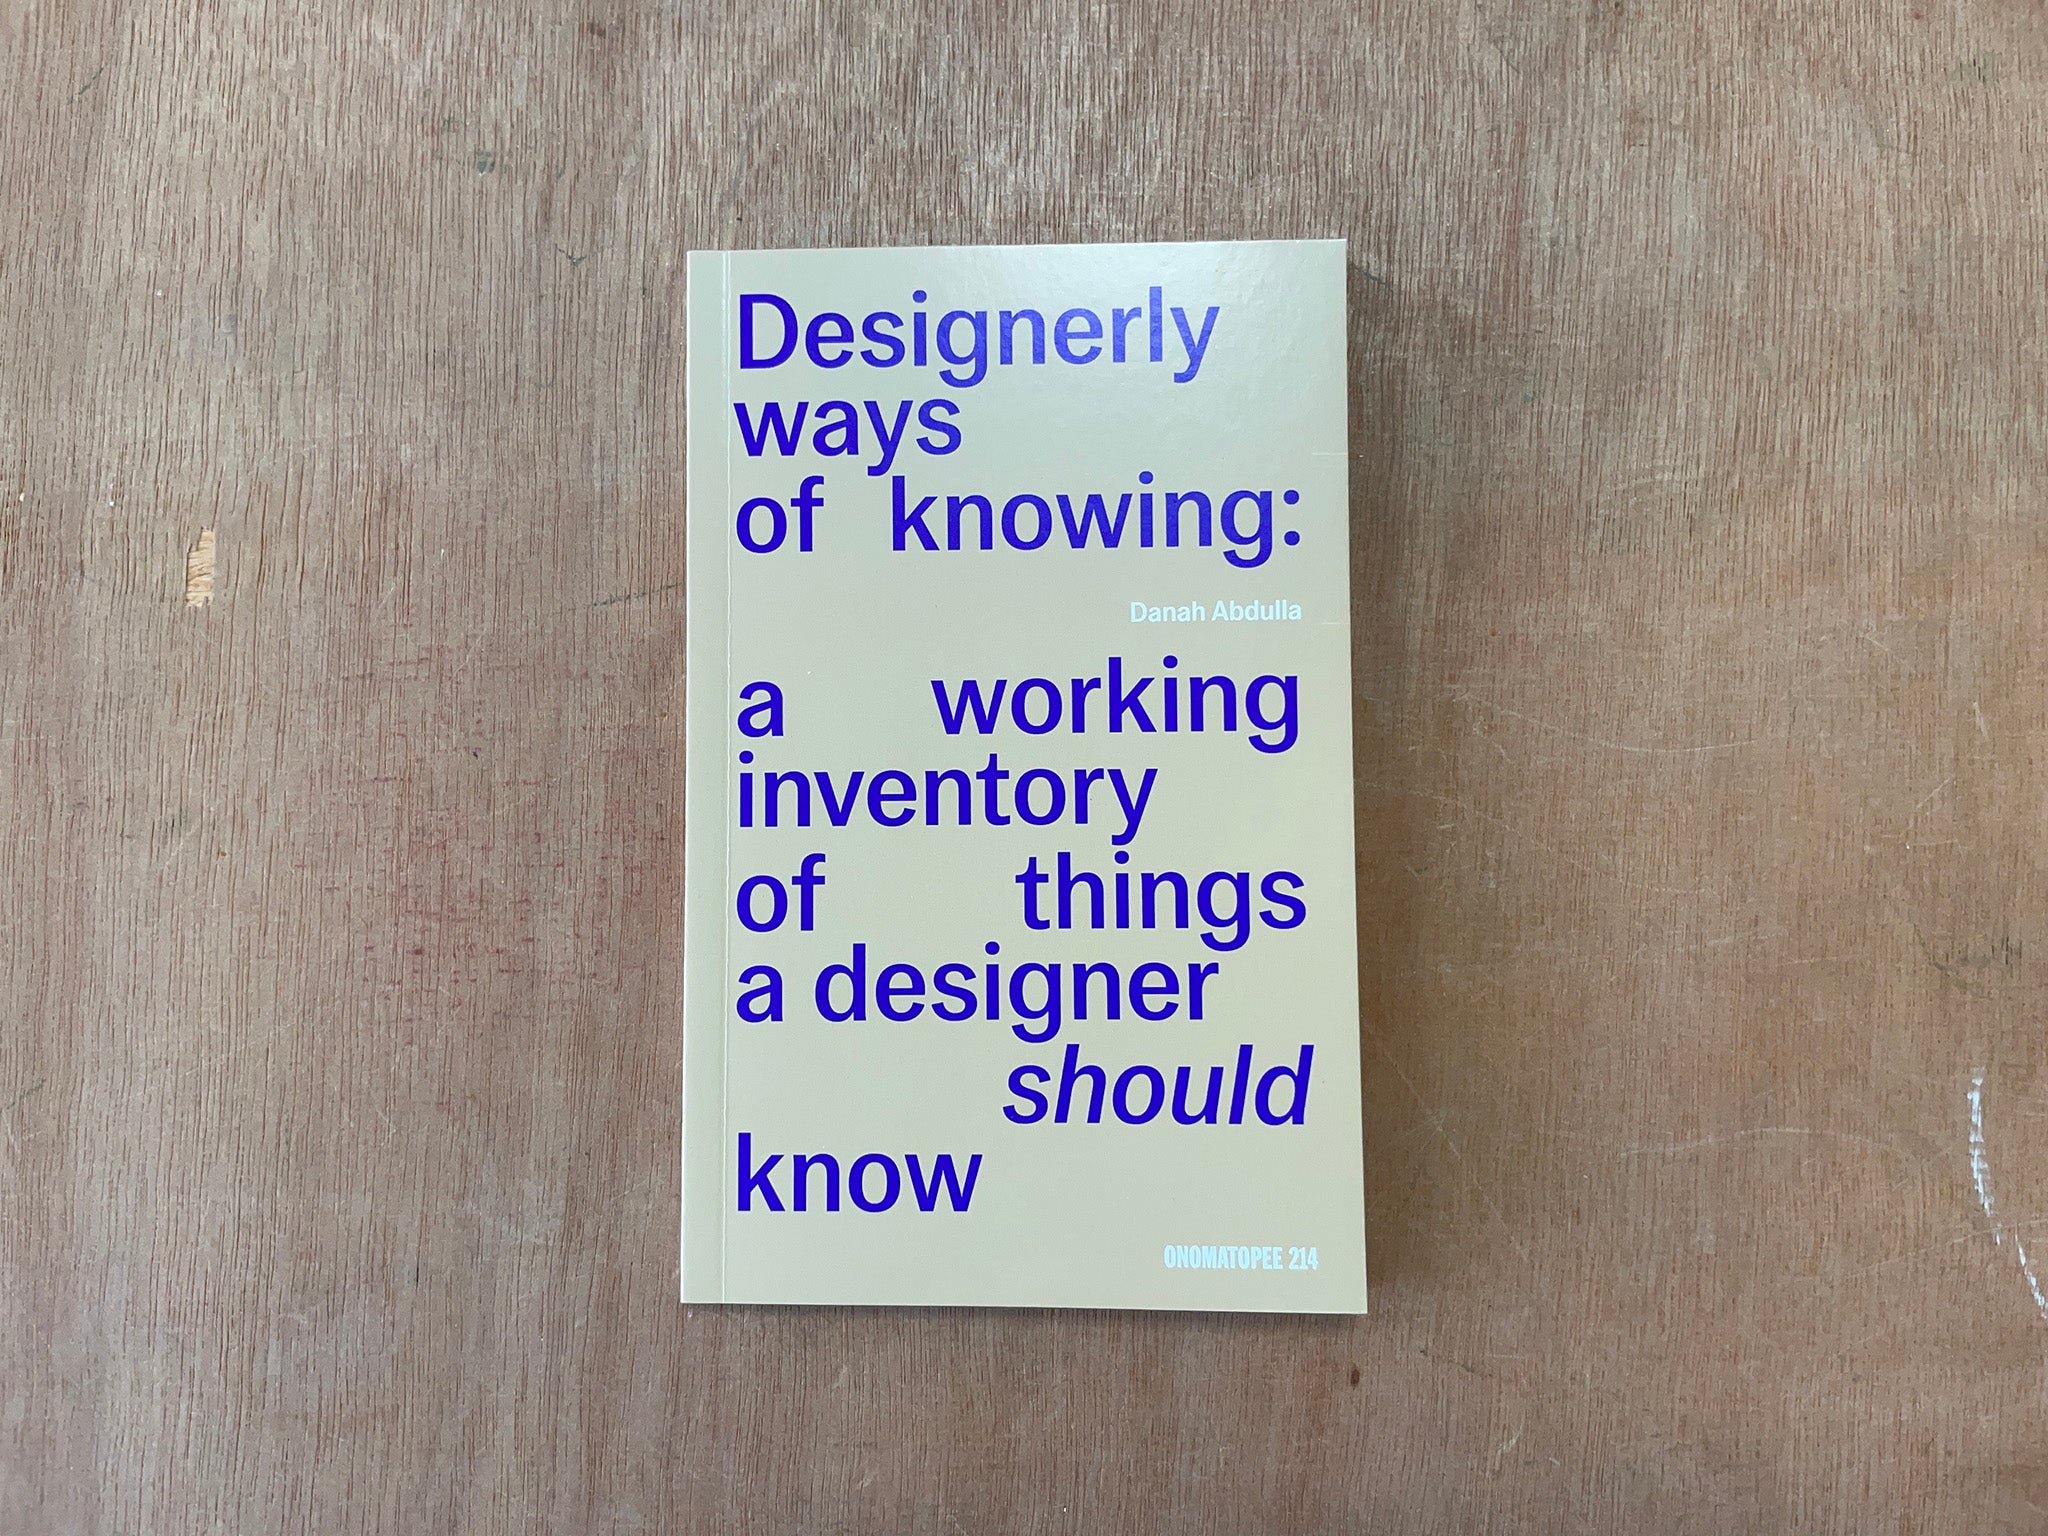 DESIGNERLY WAYS OF KNOWING A WORKING INVENTORY OF THINGS A DESIGNER SHOULD KNOW by Danah Abdulla